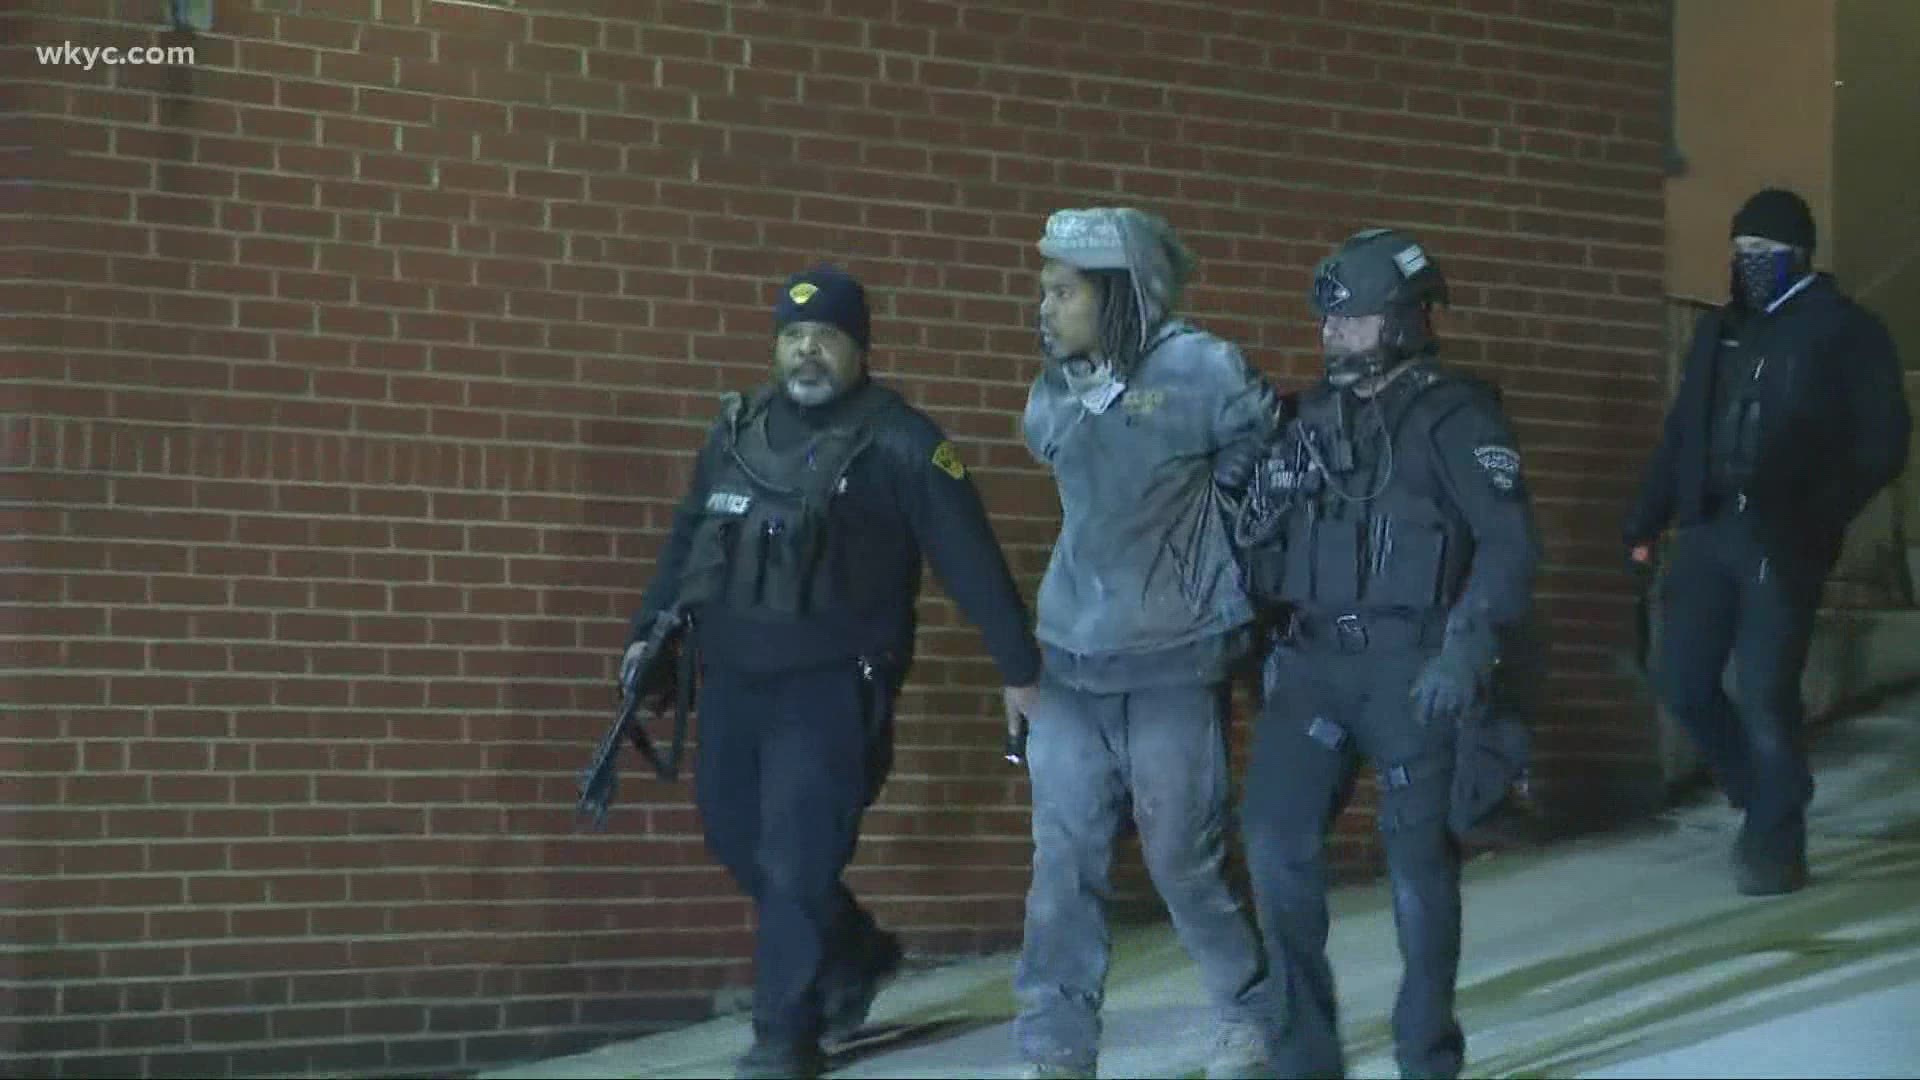 Jan. 22, 2021: A SWAT situation at the Noble Motel in East Cleveland, which started shortly before 2 p.m. Thursday, came to an end around 3:35 a.m. Friday.